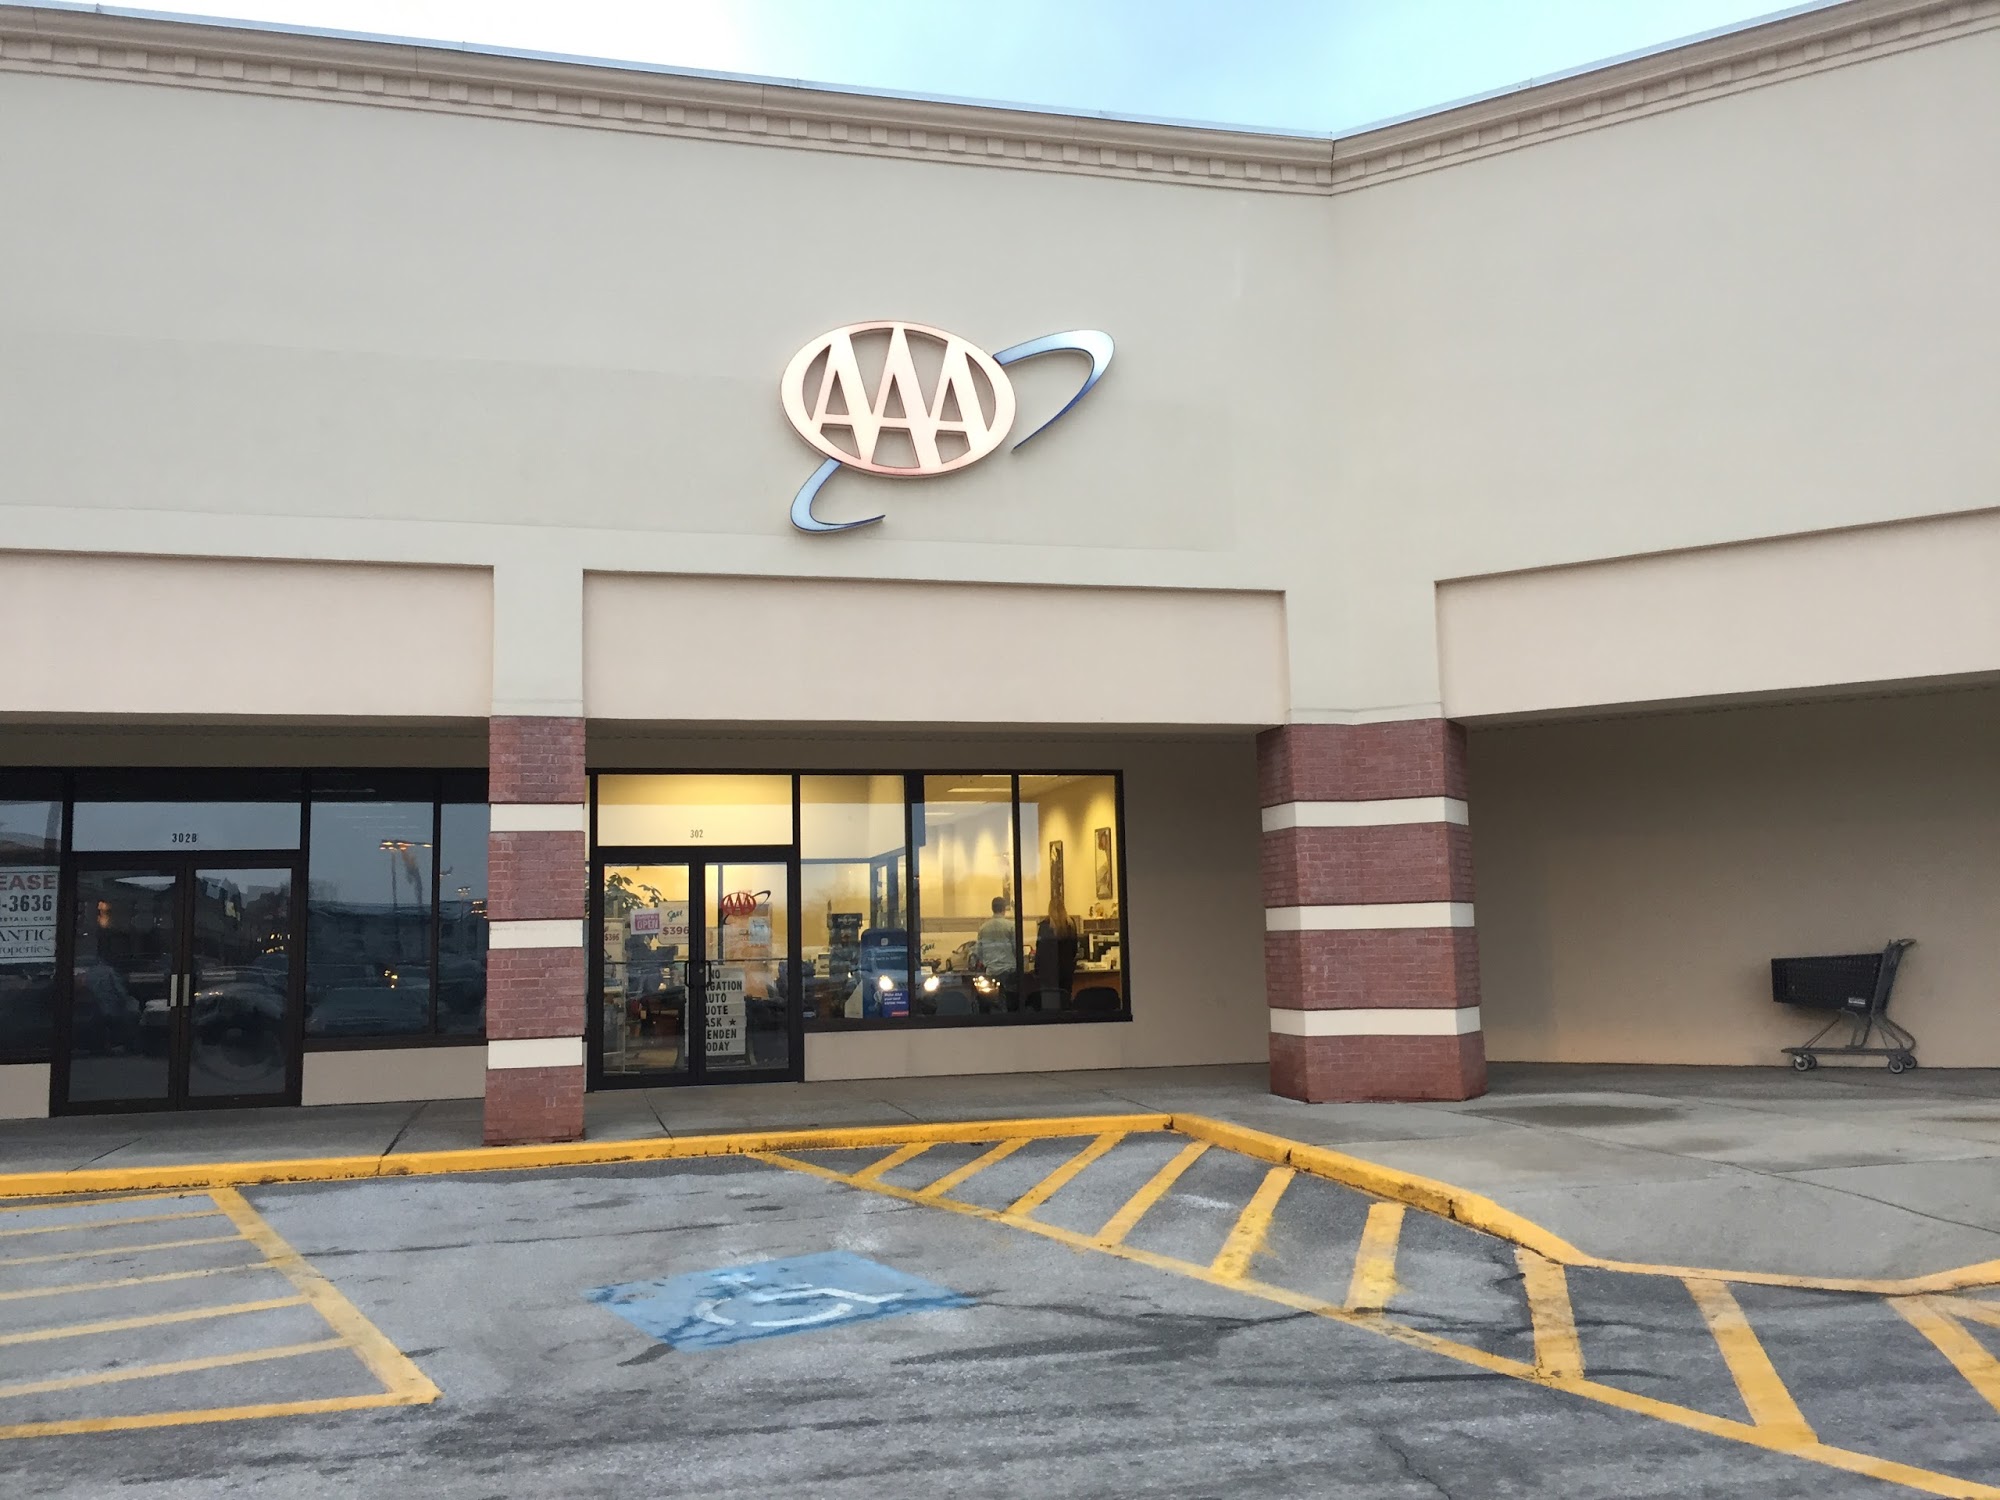 AAA Rutland Insurance and Member Services